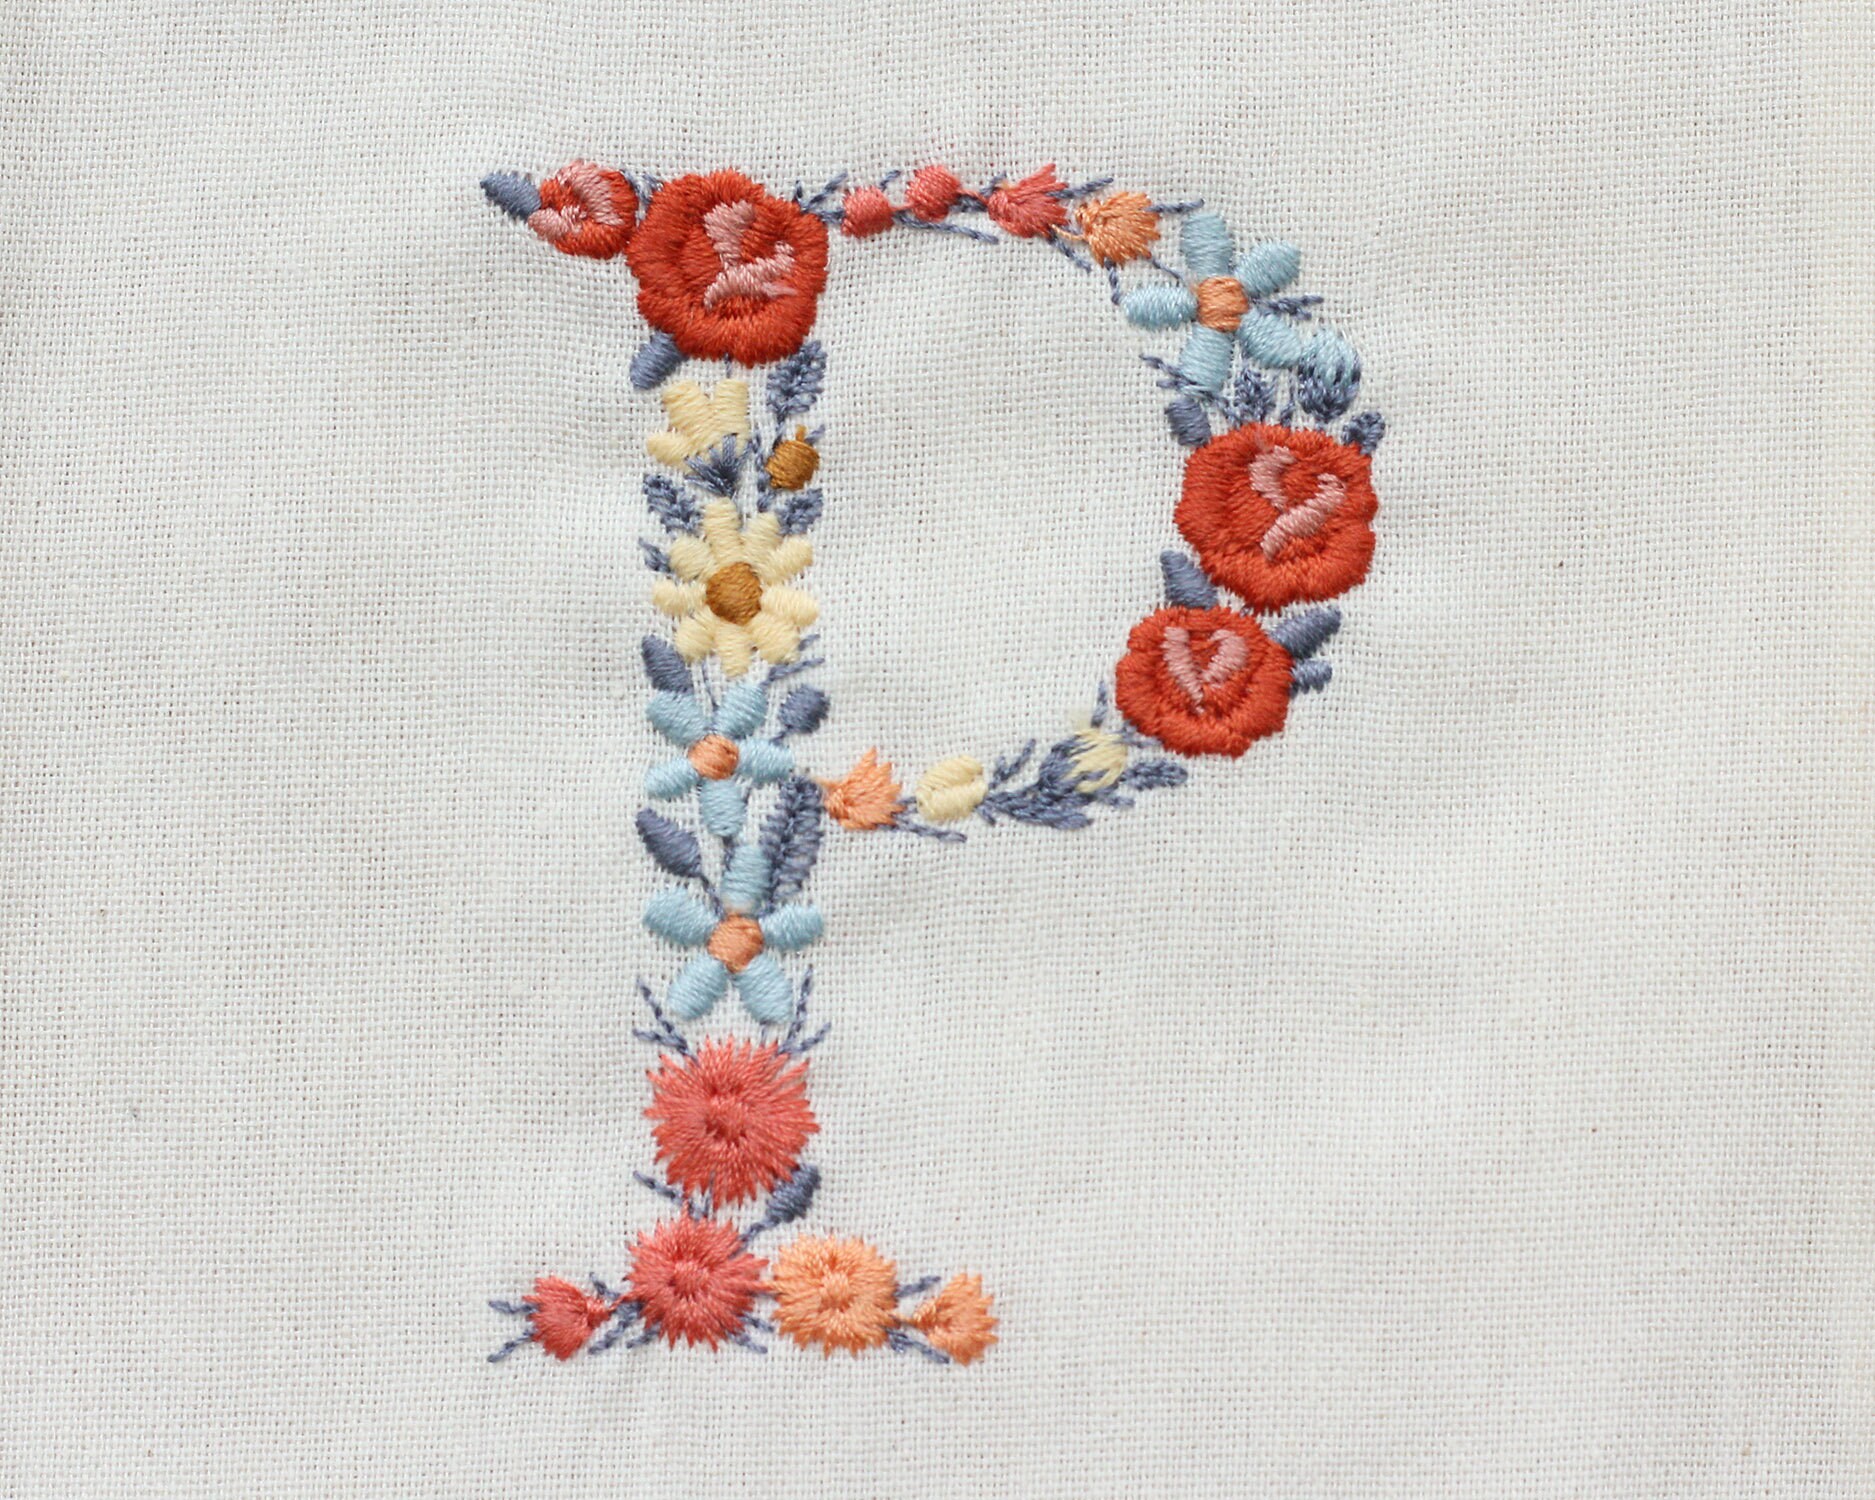 P and S 6 Two-letter Monogram Machine Embroidery Design in 5 Sizes for 4 X  4 and 5 X 7 Hoops 